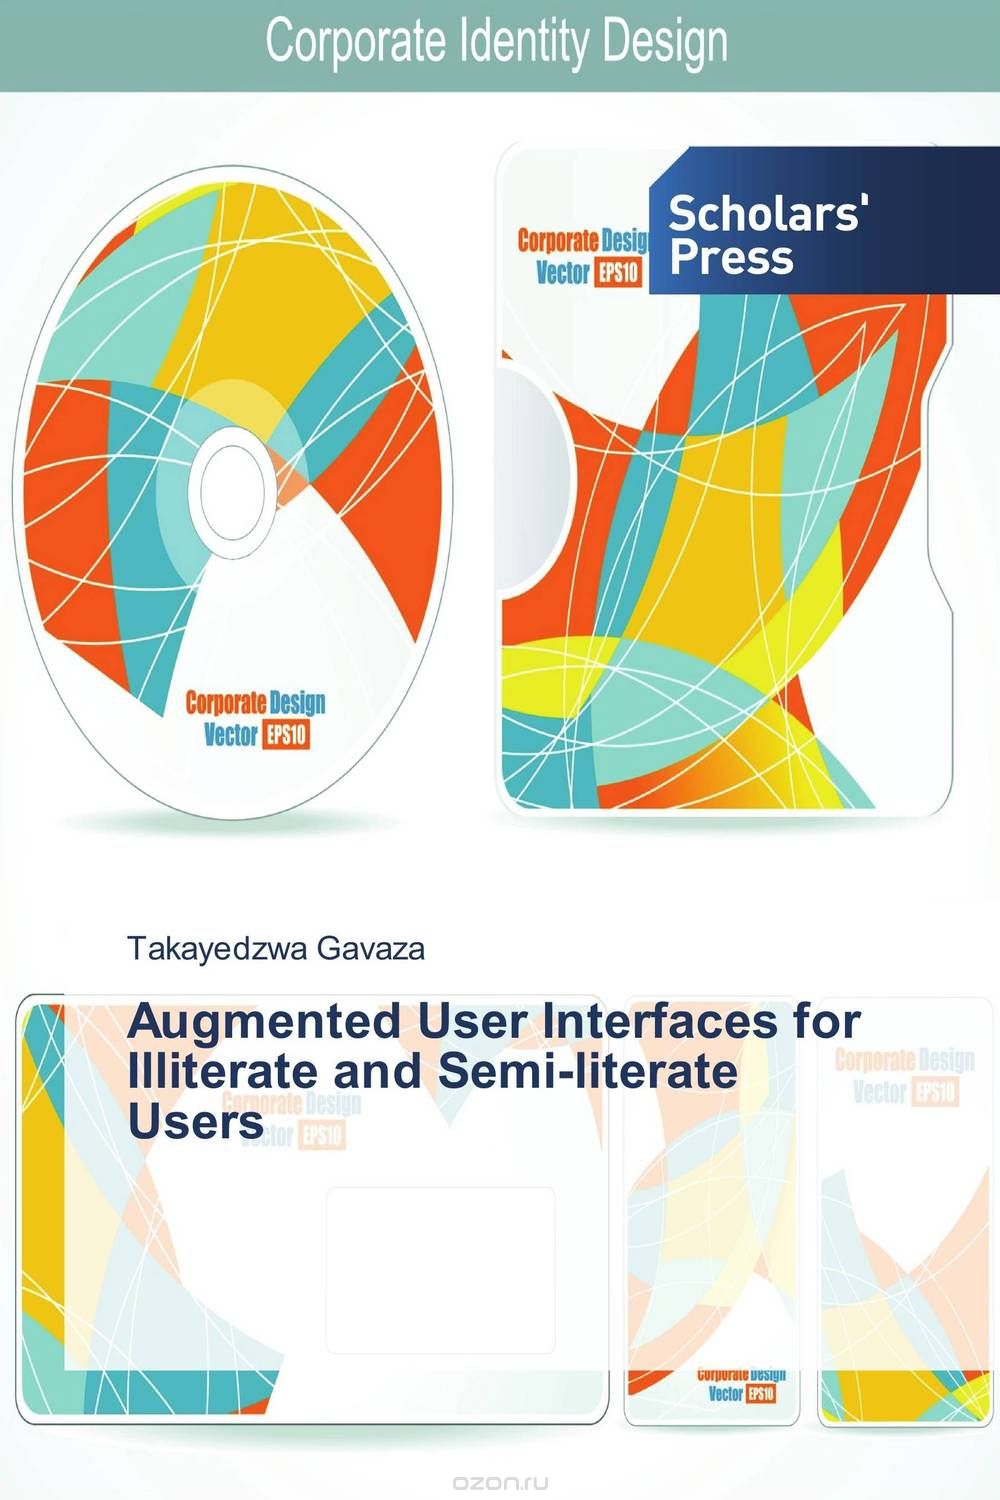 Скачать книгу "Augmented User Interfaces for Illiterate and Semi-literate Users"